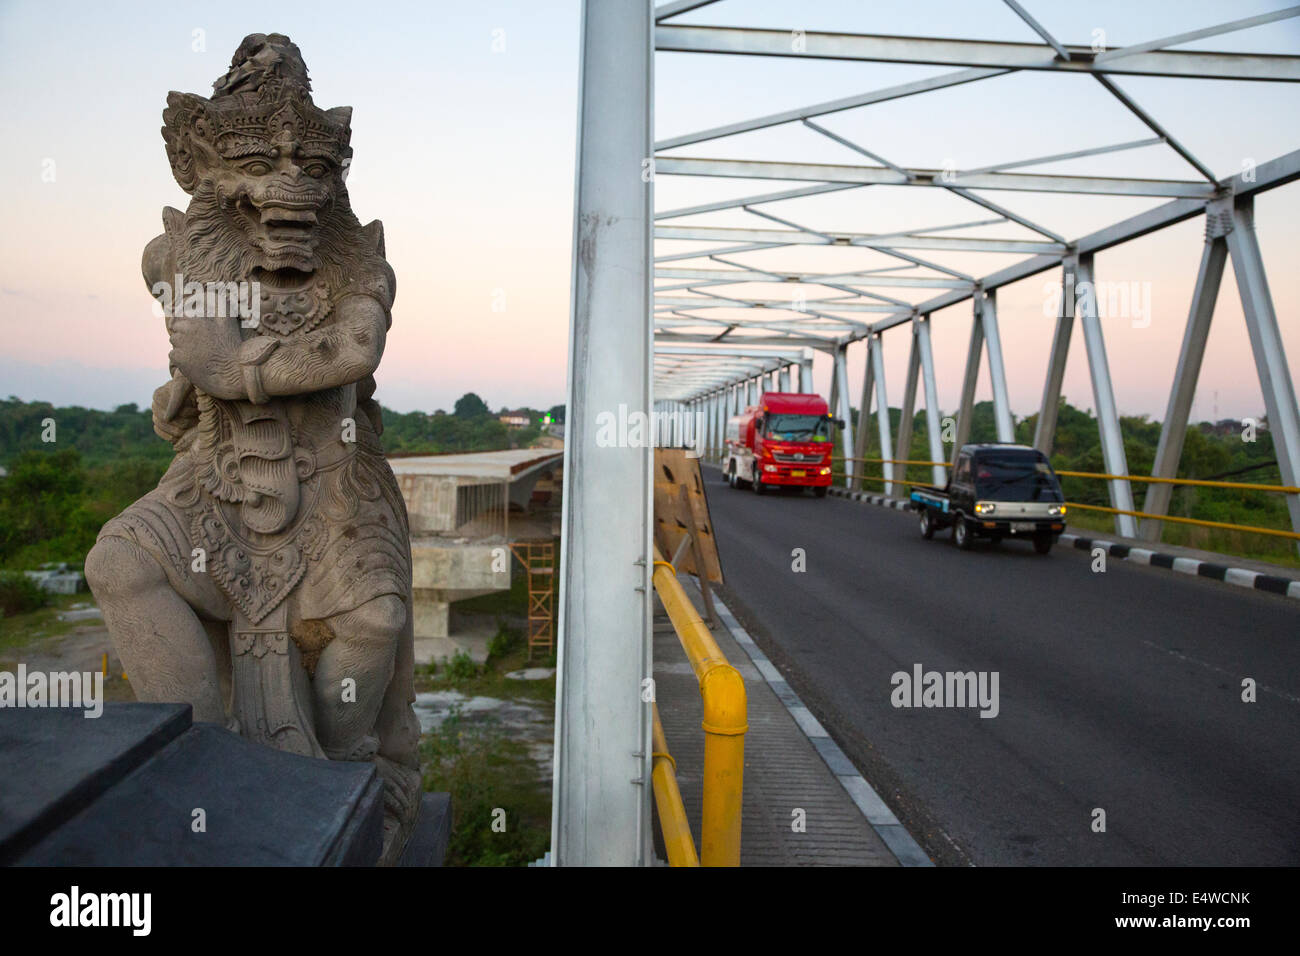 Bali, Indonesia.  Mythical Figure Guards a Bridge in Southern Bali.  New Bridge under Construction in Background. Stock Photo